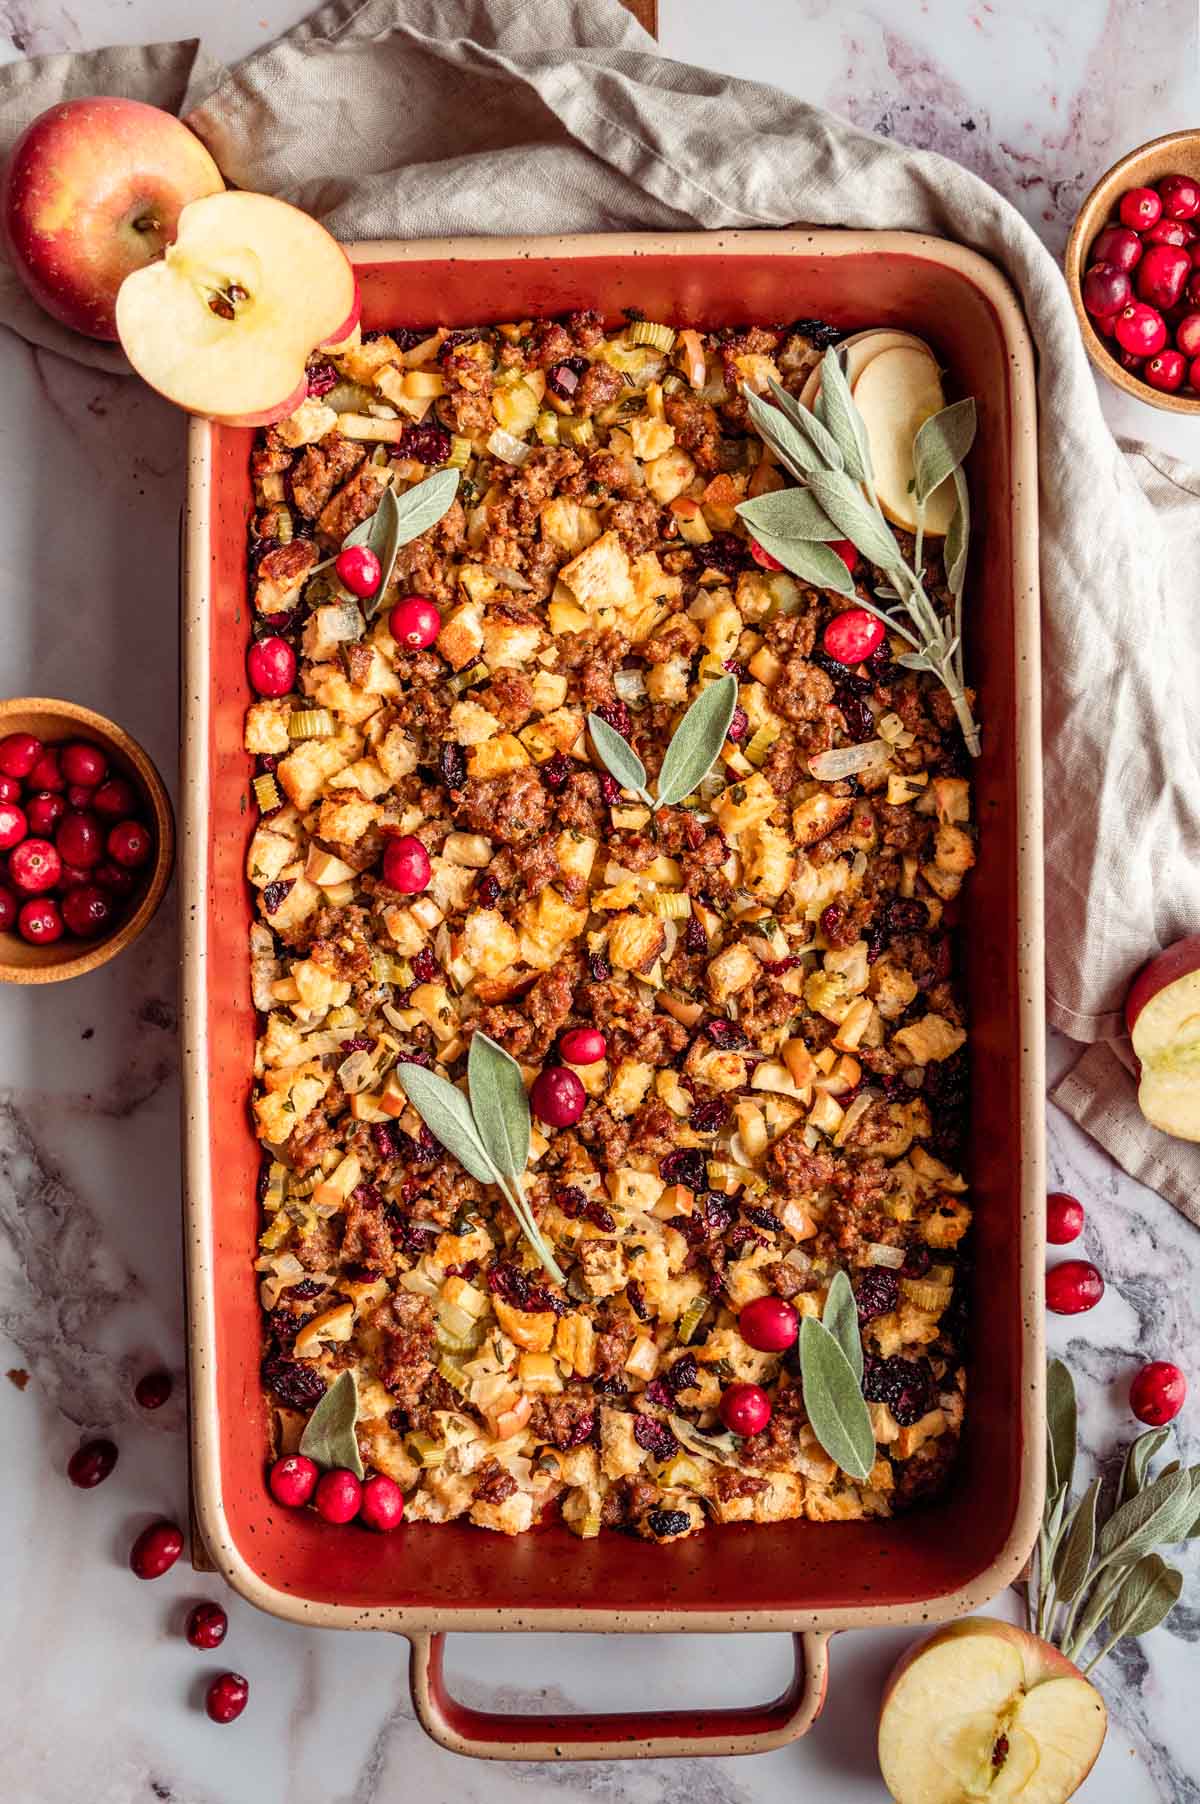 Sausage Apple Cranberry Stuffing in a red baking dish surrounded by fresh cranberries, apples, and sage leaves.